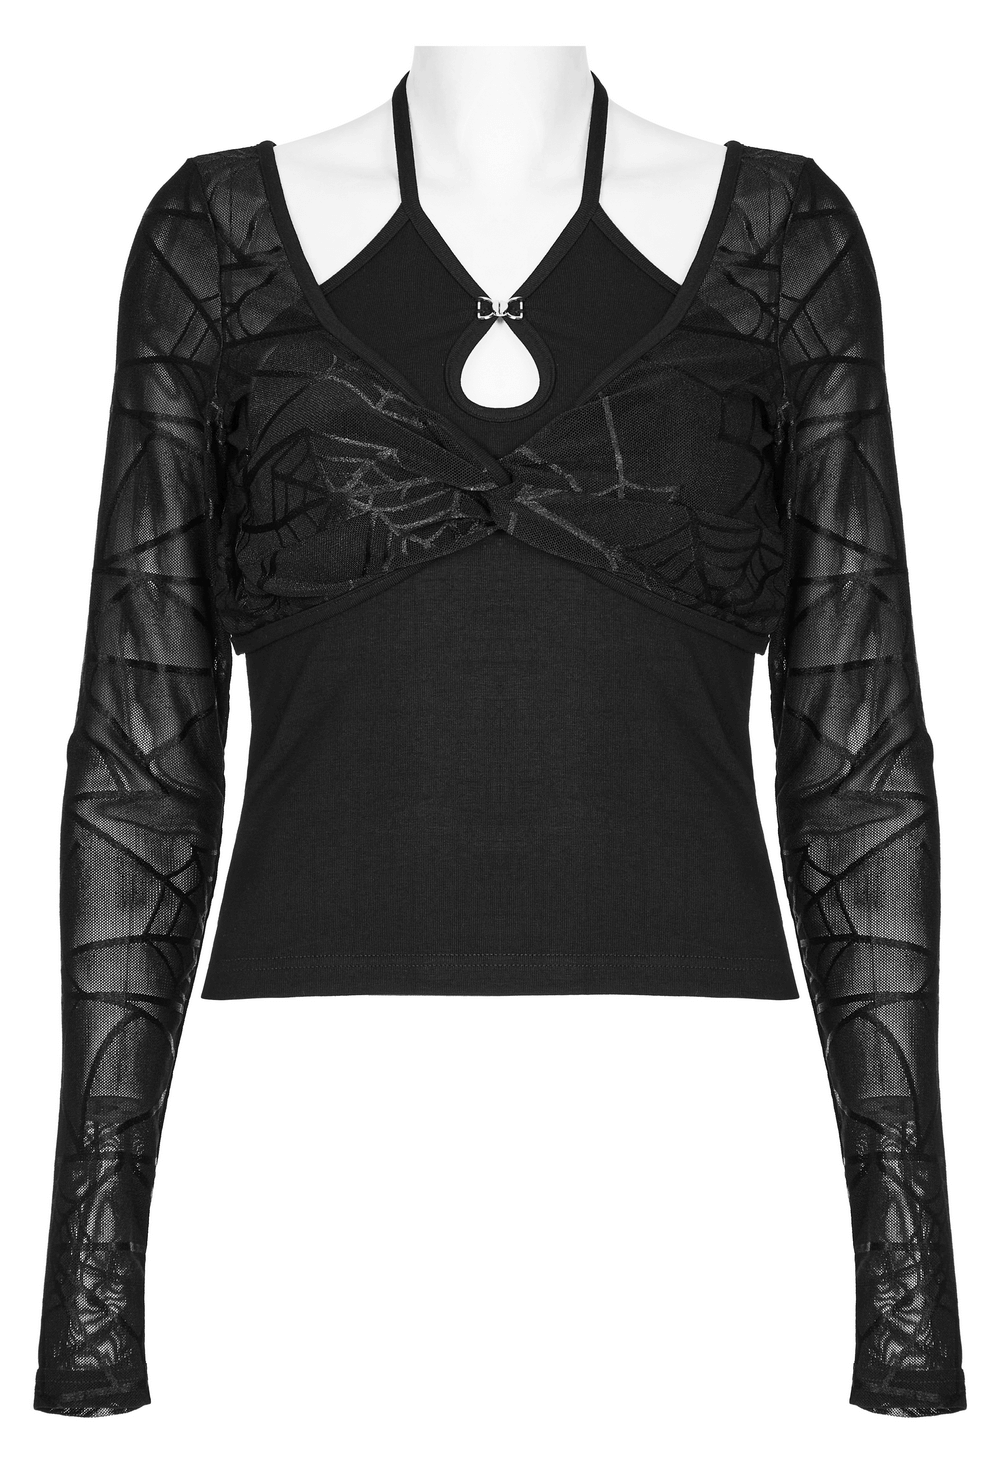 Women's Gothic and Rock Dark Fashion Apparel and Accessories